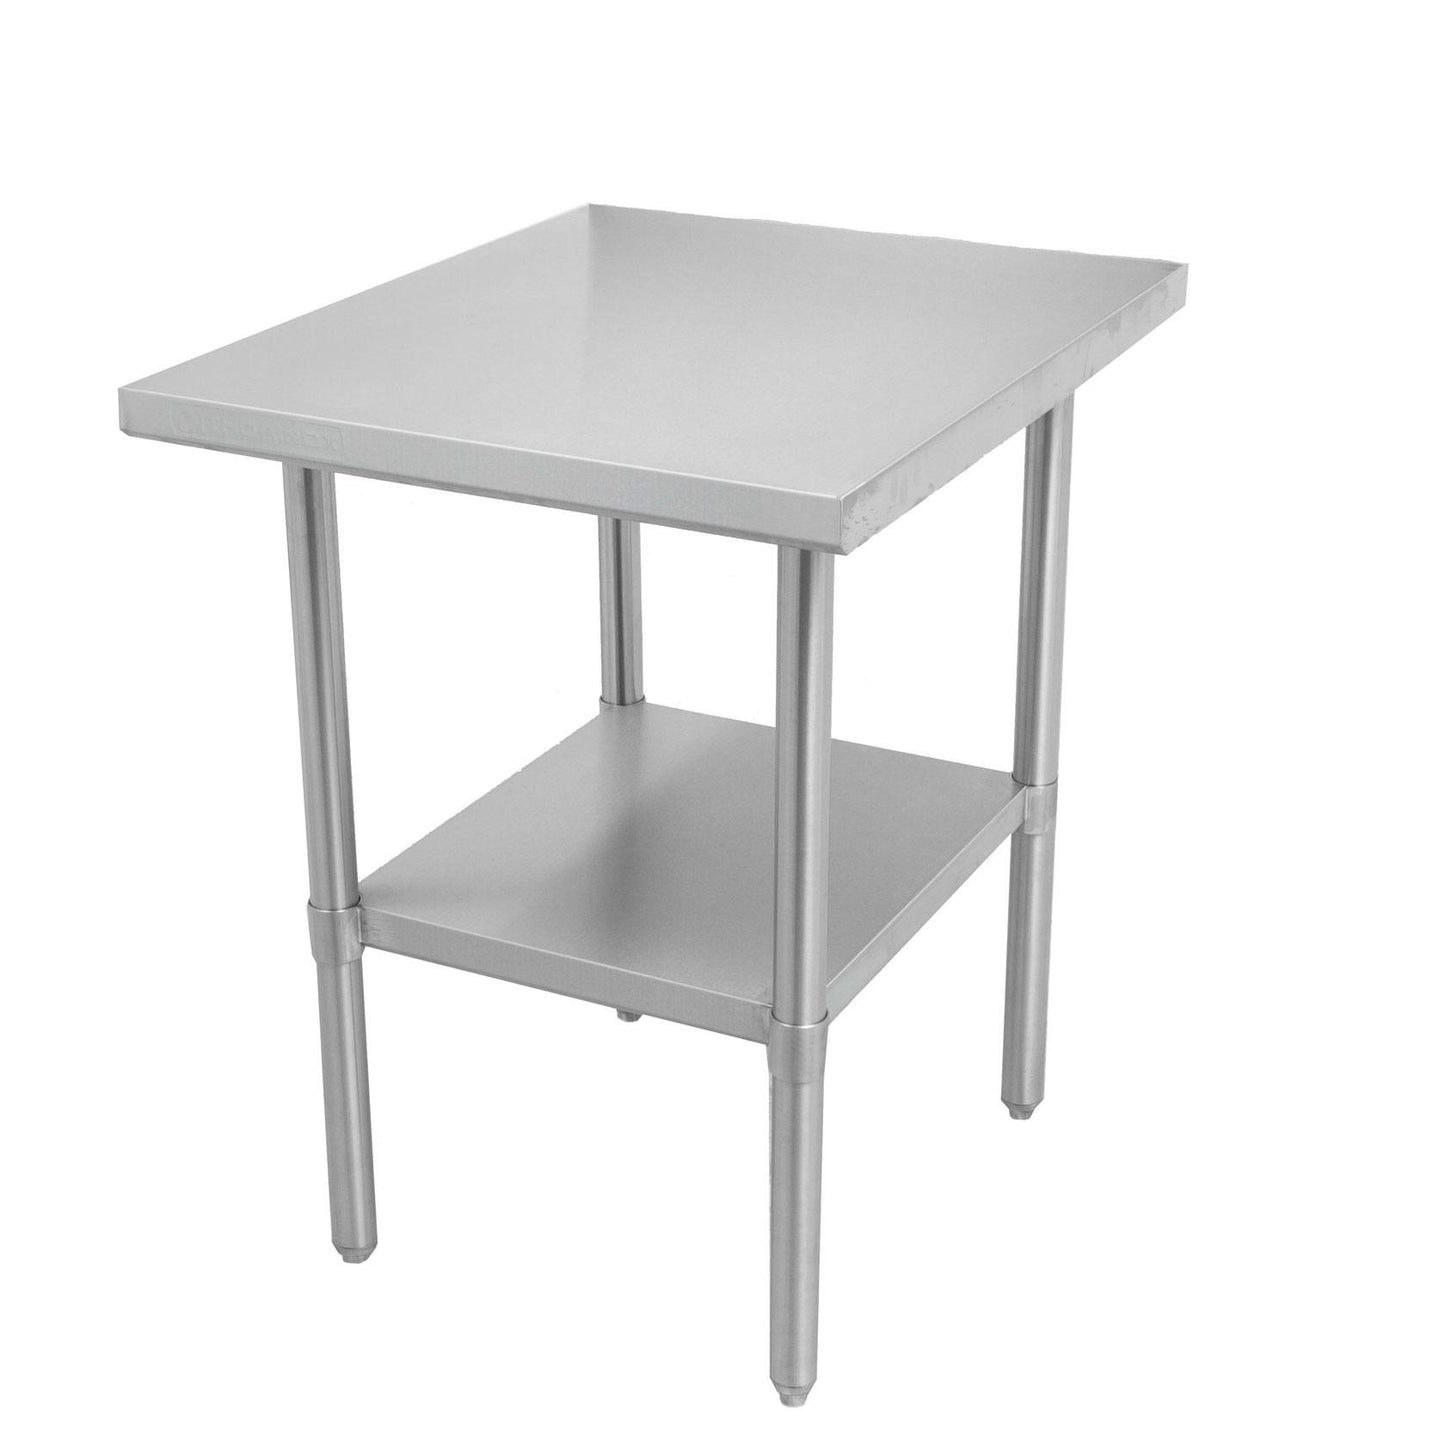 Thorinox DSST-2430-BK Table, 30"W x 24"D x 39"H, Stainless Steel Table with Backsplash and Galvanized Shelf